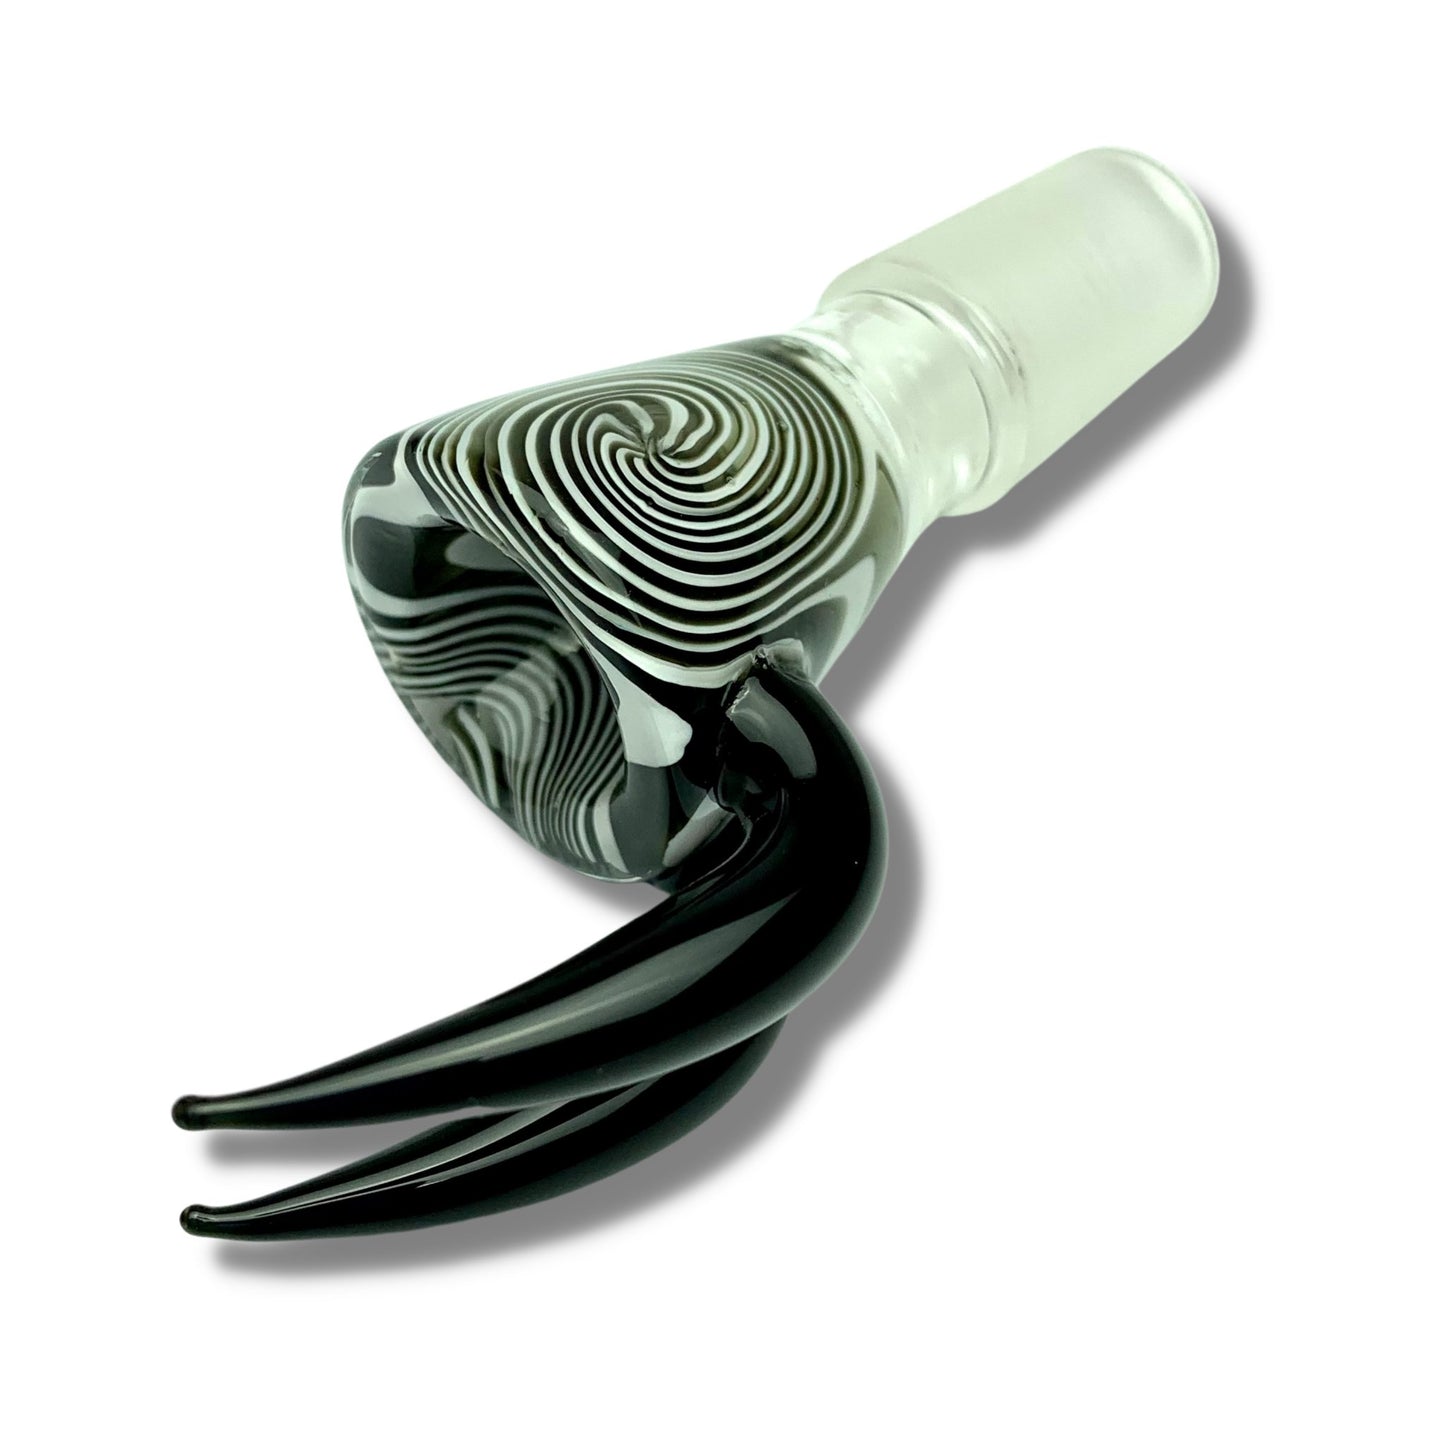 18mm Rabbit Ear Swirl Cone Piece Black and White - The Bong Baron